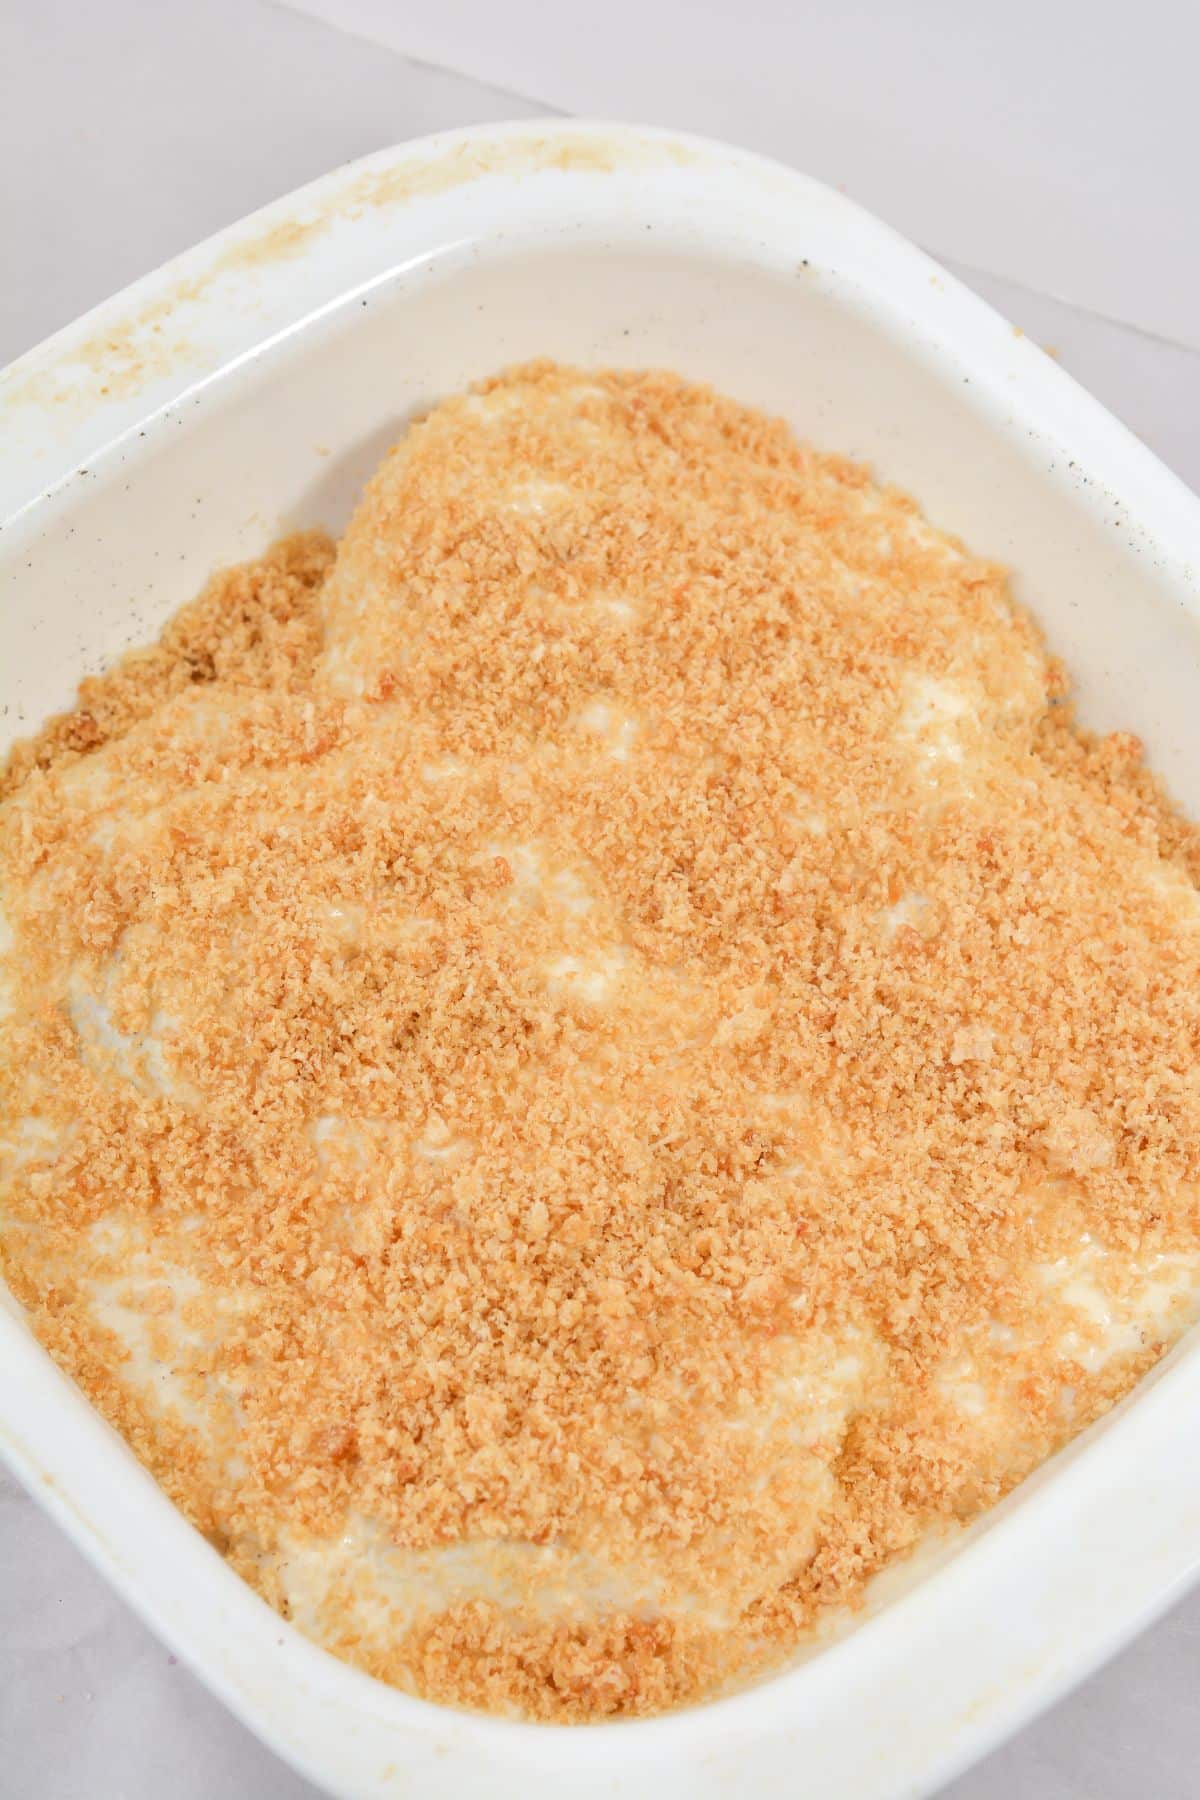 A layer of pork rind crumbs covers the chicken in a baking dish.